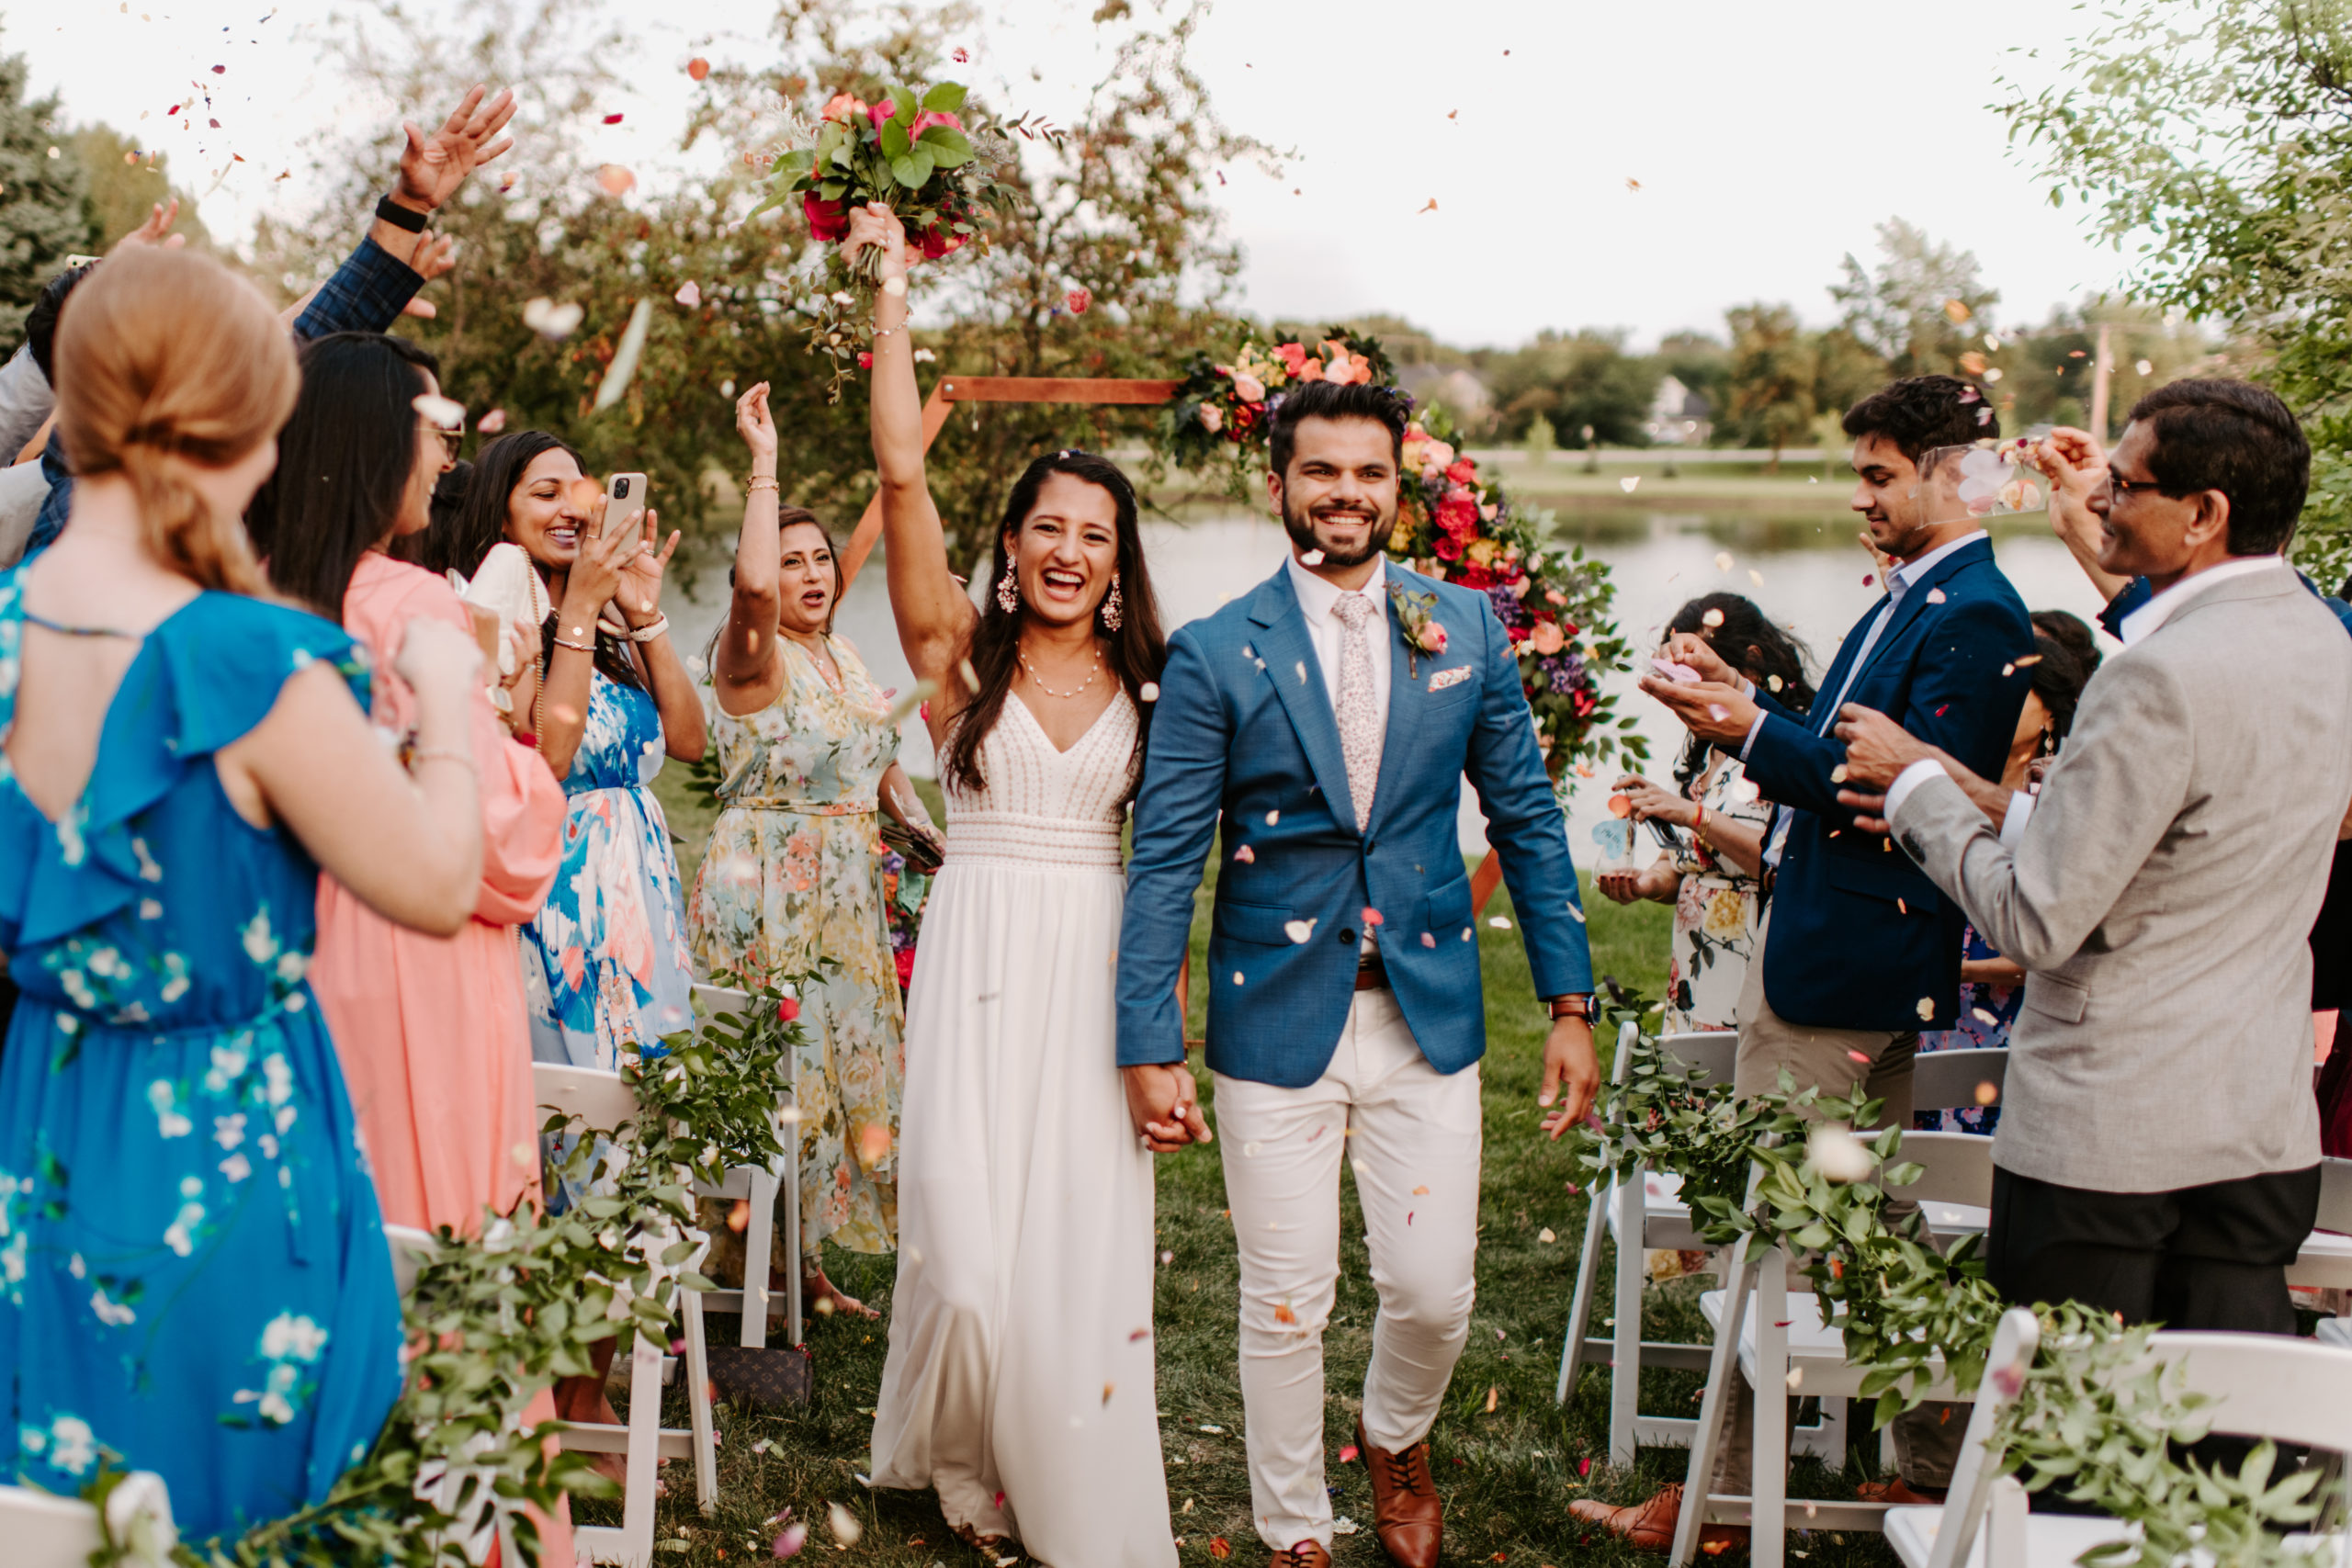 An Intimate, Love-In-The-Air Backyard Wedding - Photographs by Teresa